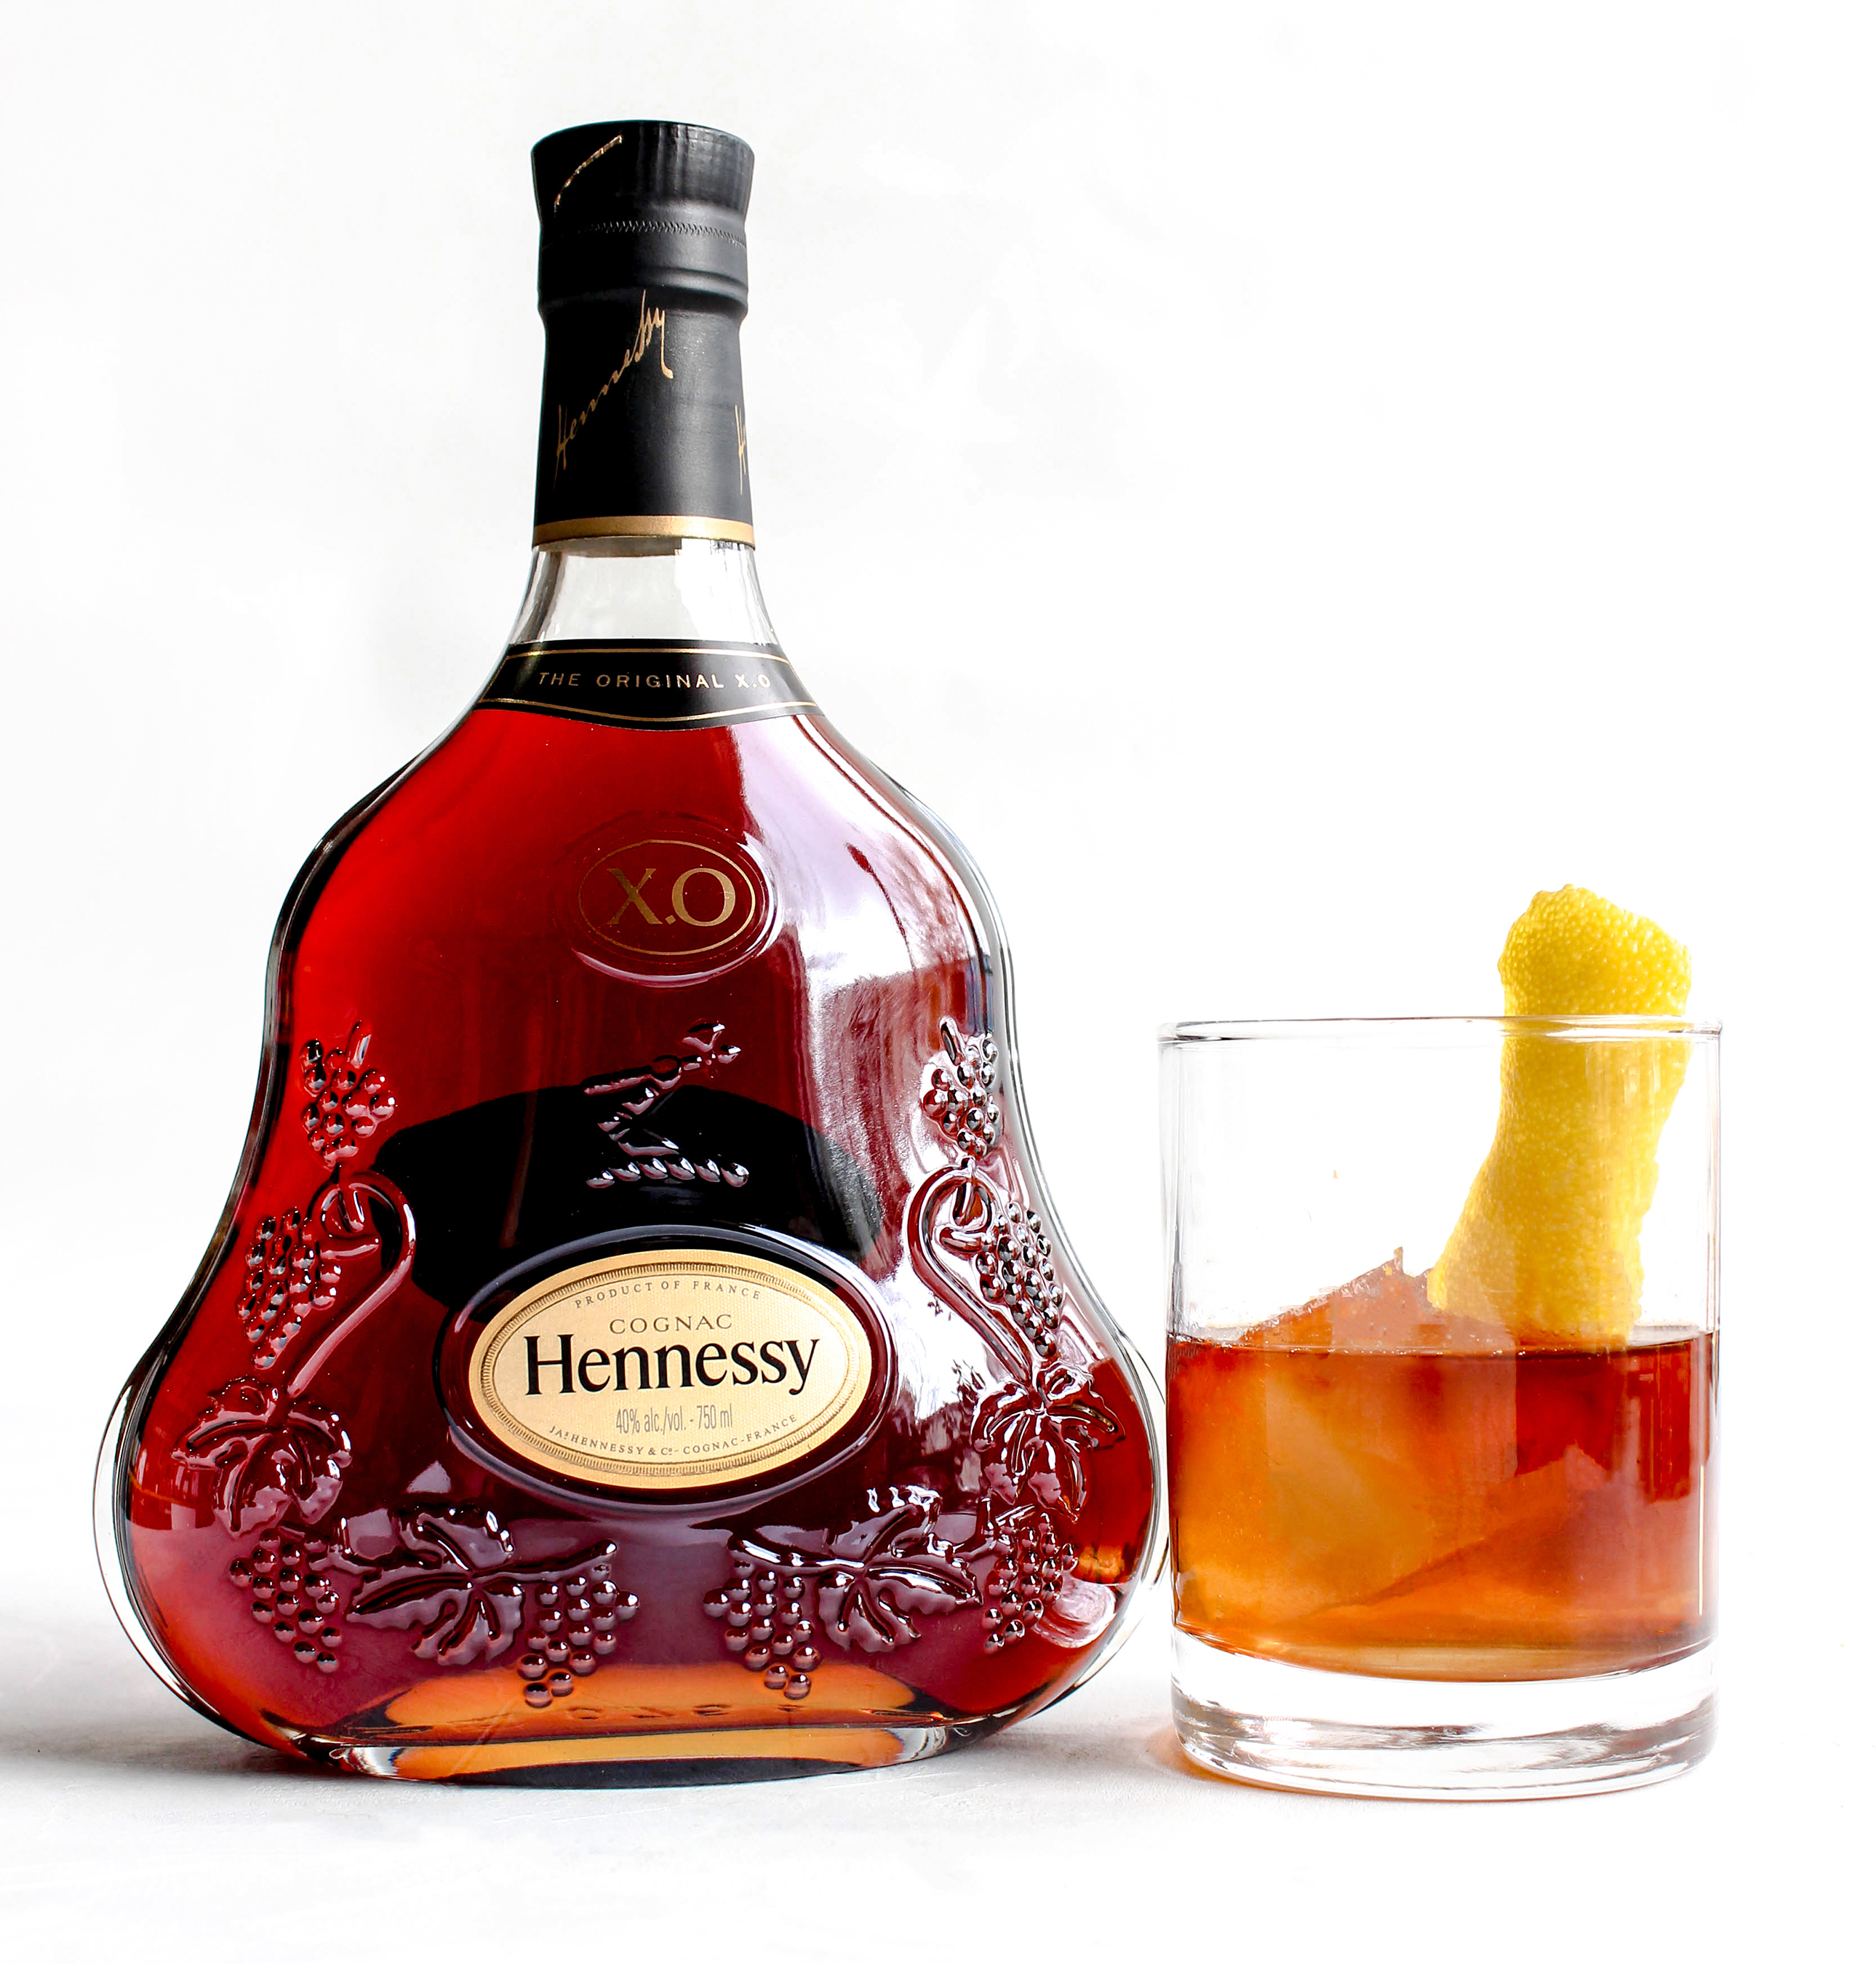 Inspired by Lim and Leon's travels to Hong Kong and beyond, Hennessy's X.O cocktail is the ultimate expression of 